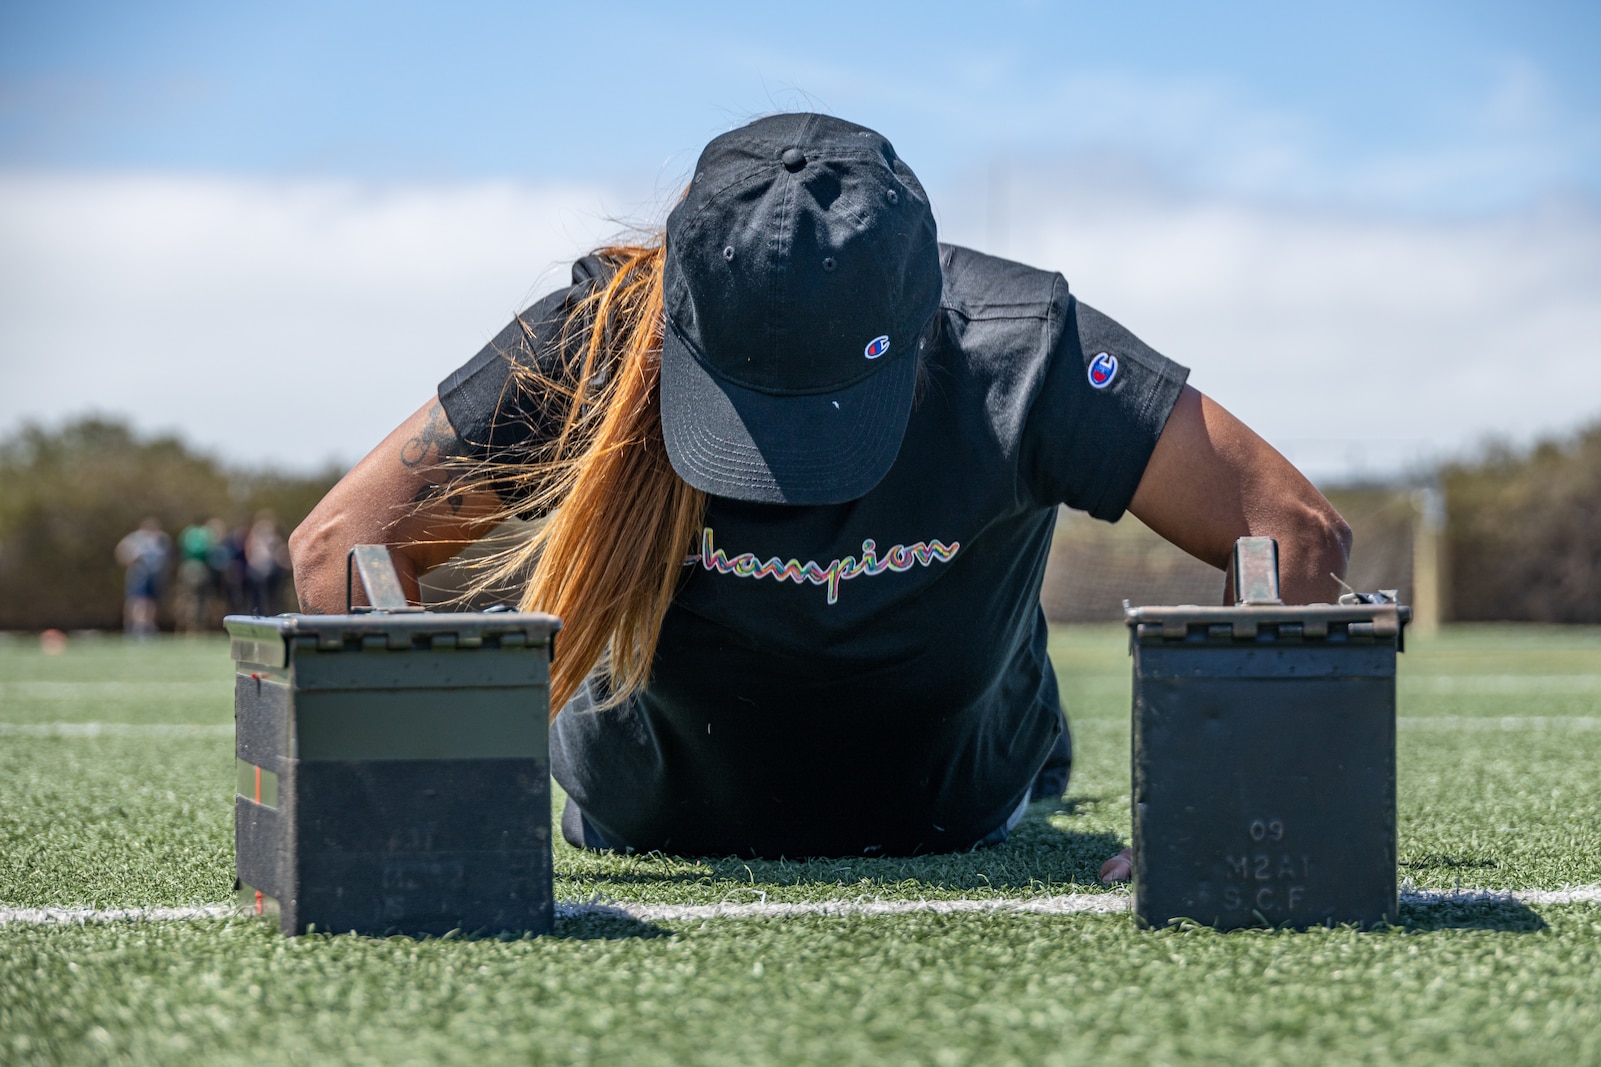 Patricia Solis, a campus officer at Colony High School, participates in a Combat Fitness Test during the Educators' Workshop at Marine Corps Recruit Depot San Diego, California, July 12, 2022.